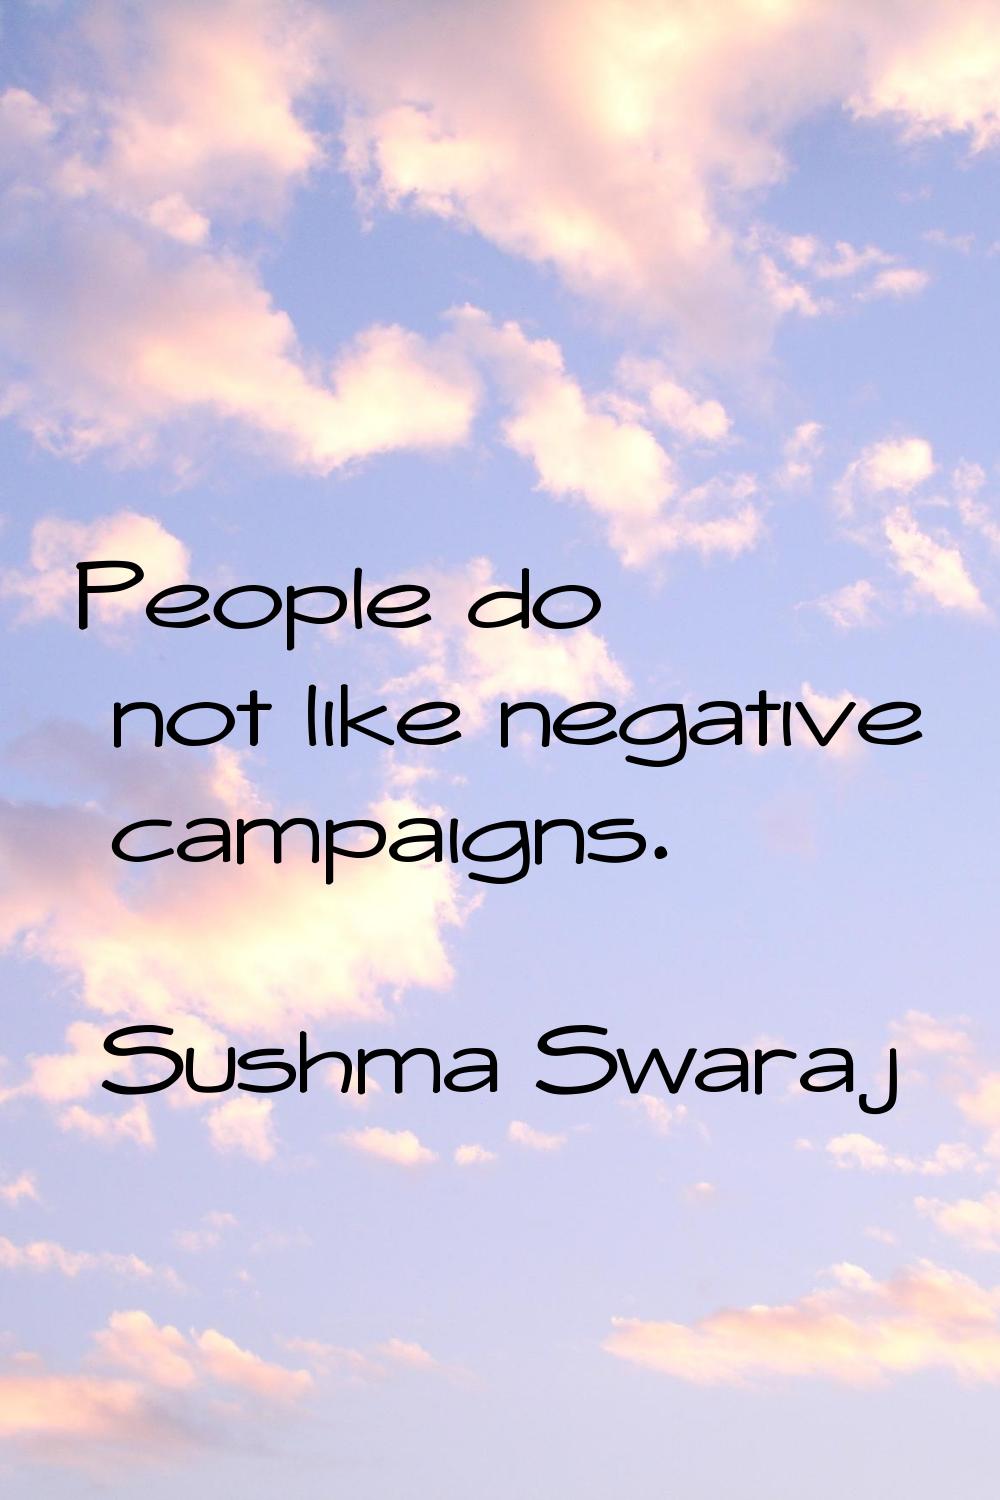 People do not like negative campaigns.